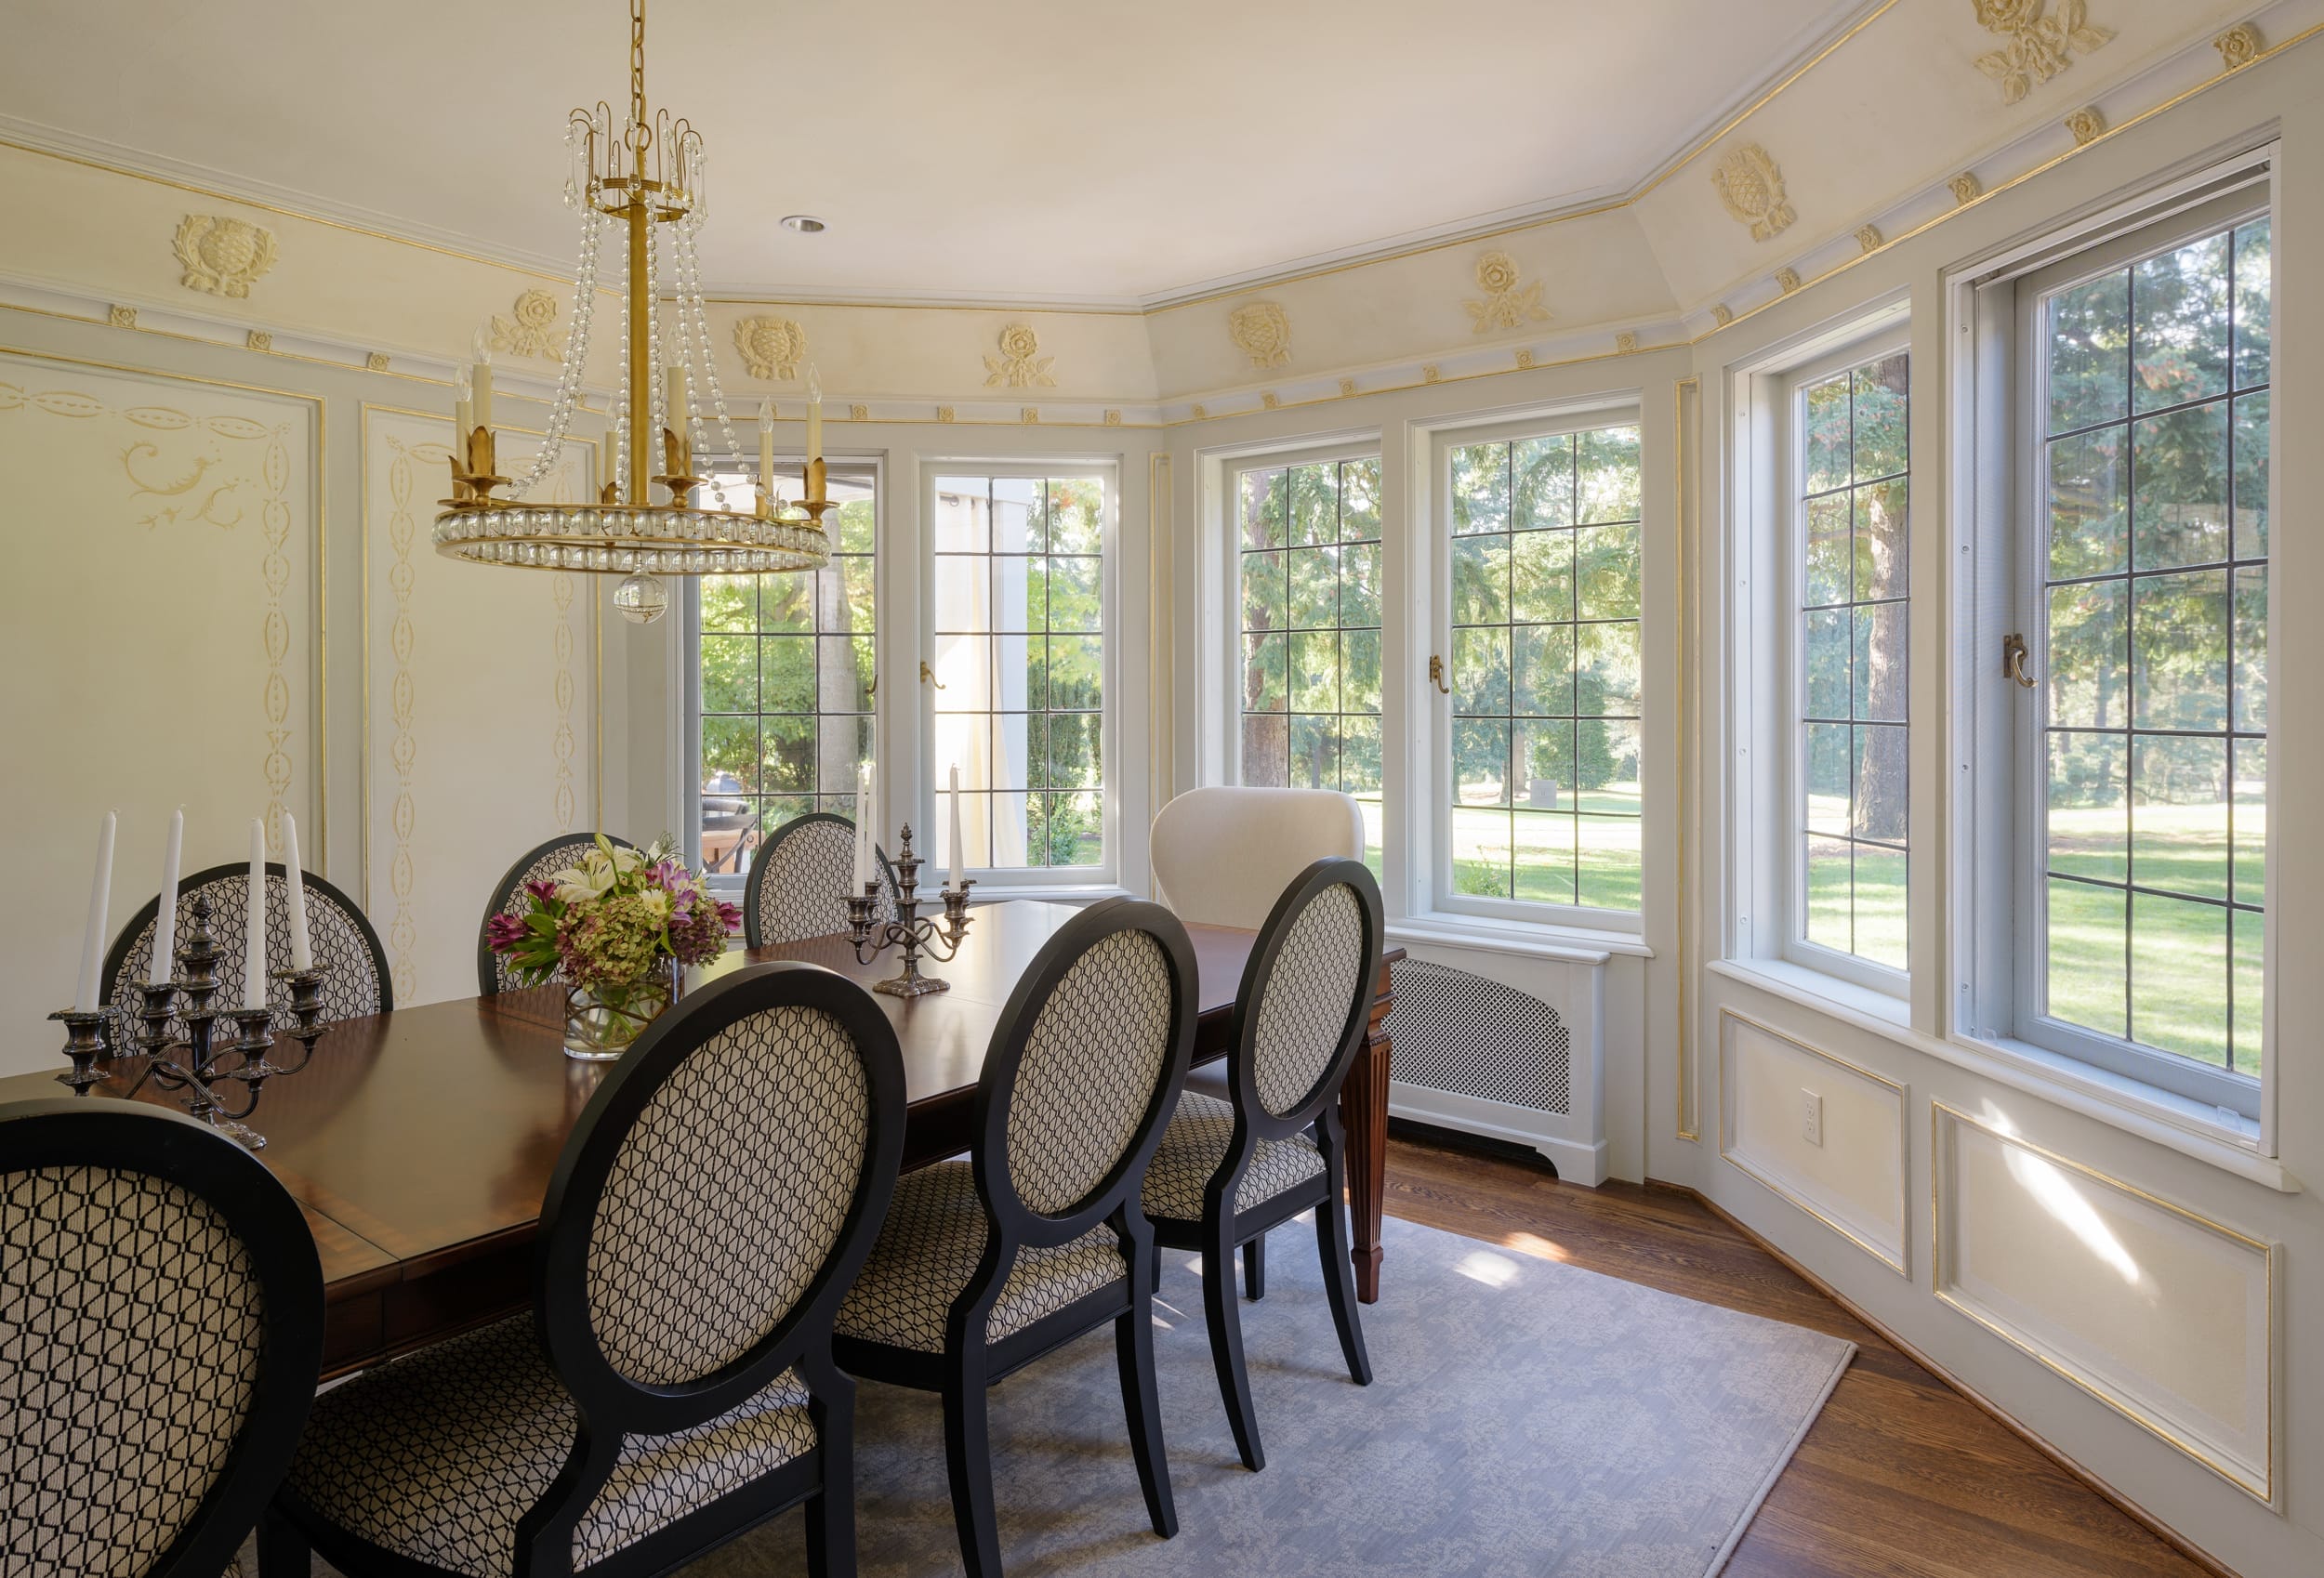 A dining room with large windows and a chandelier.